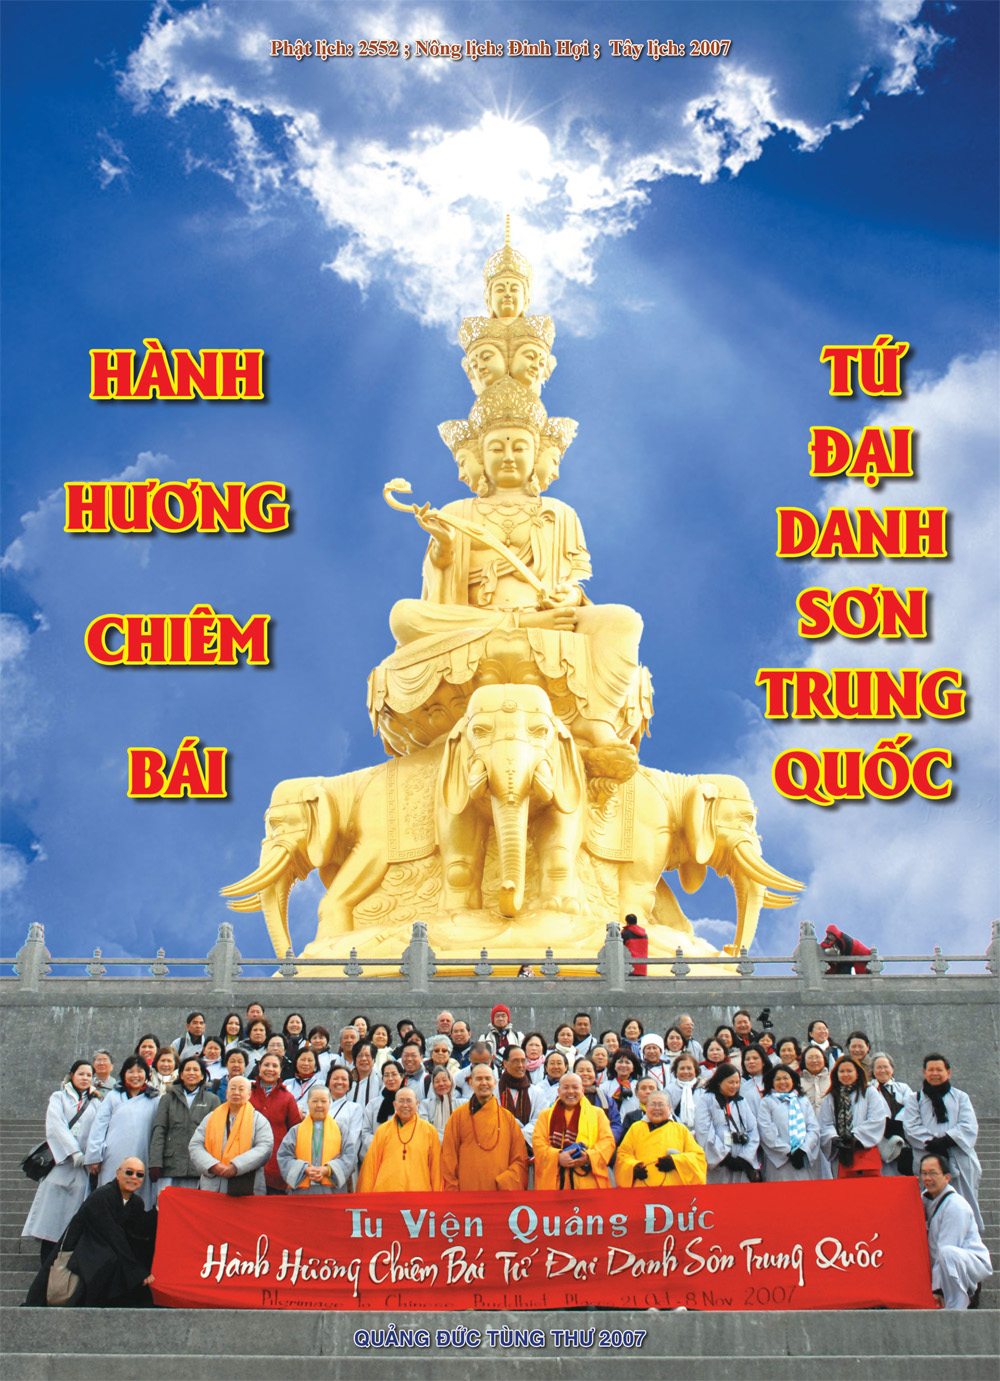 hanh huong trung quoc 2007-1